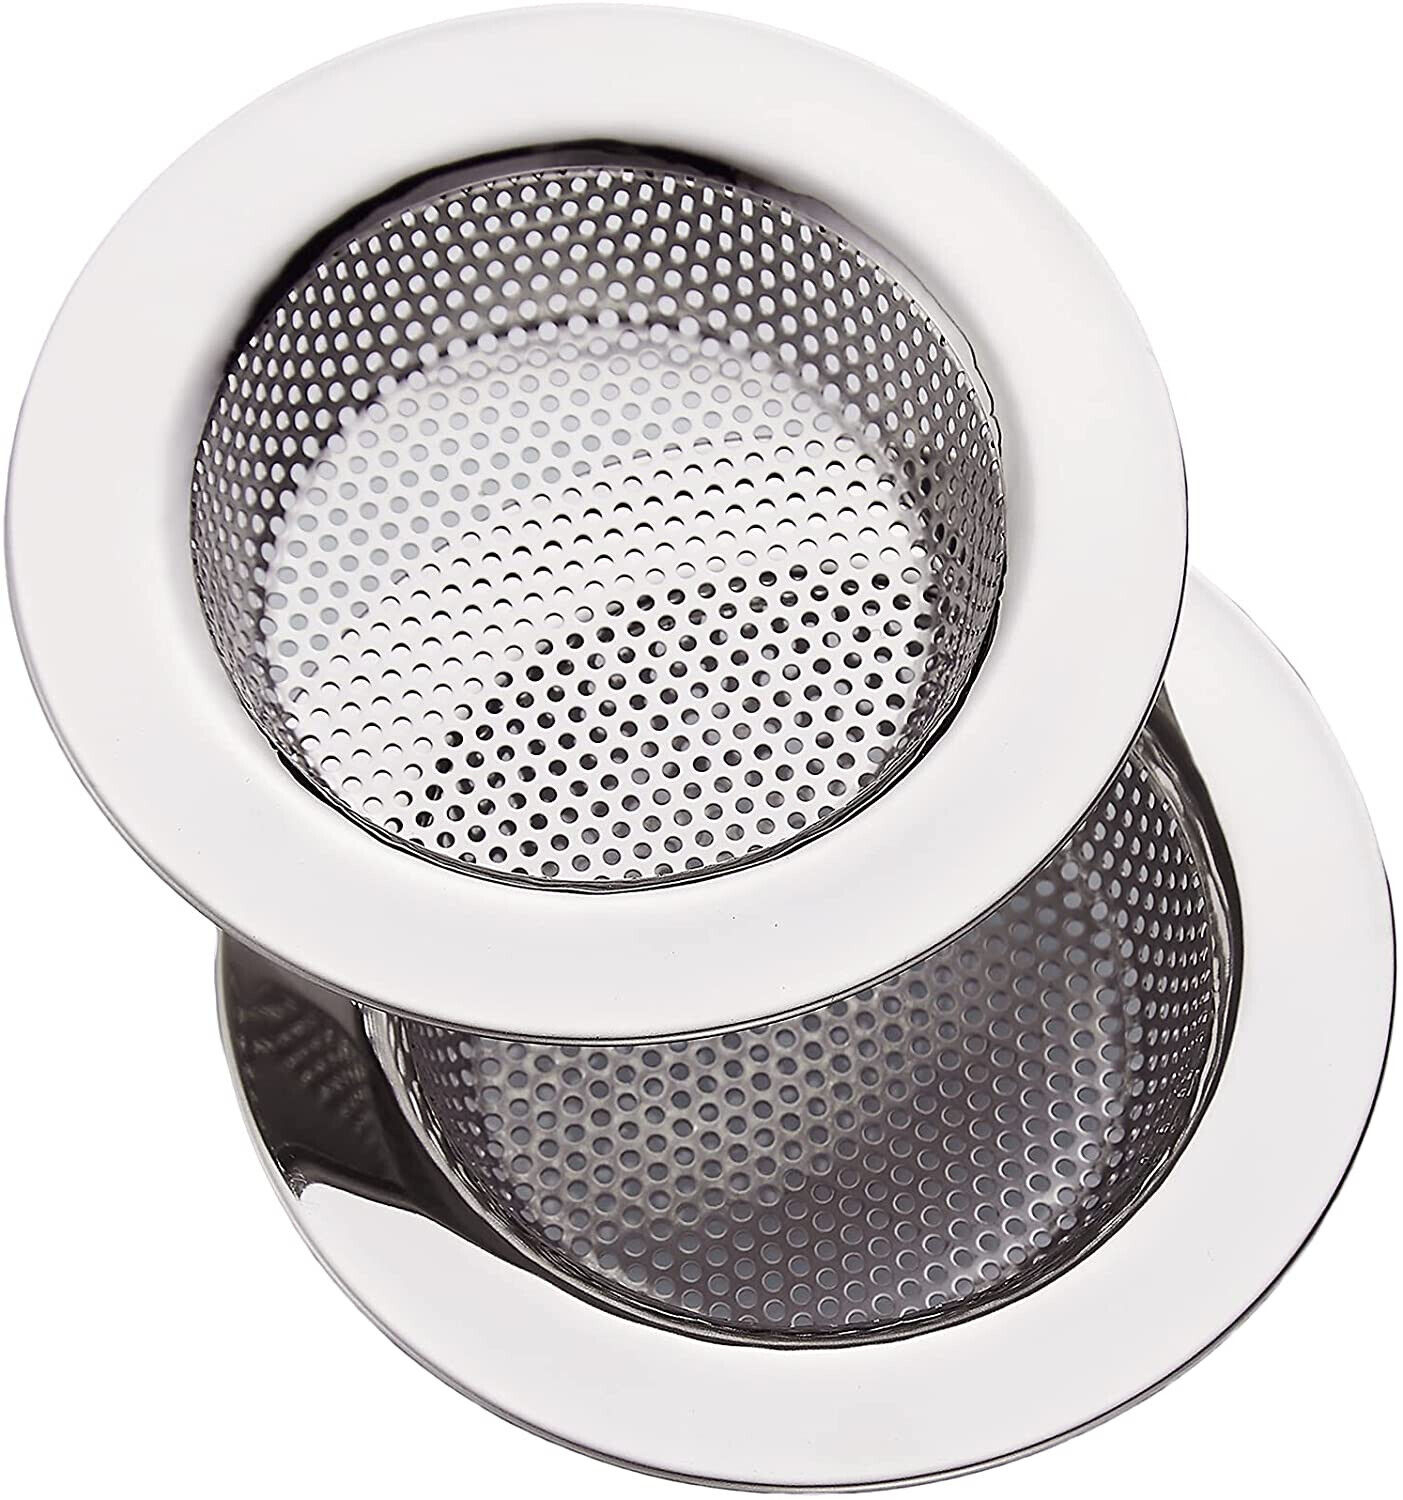 2Pack 4.5" Kitchen Sink Strainer Stopper Stainless Steel Drain Basket Waste Plug Housmile Does not apply